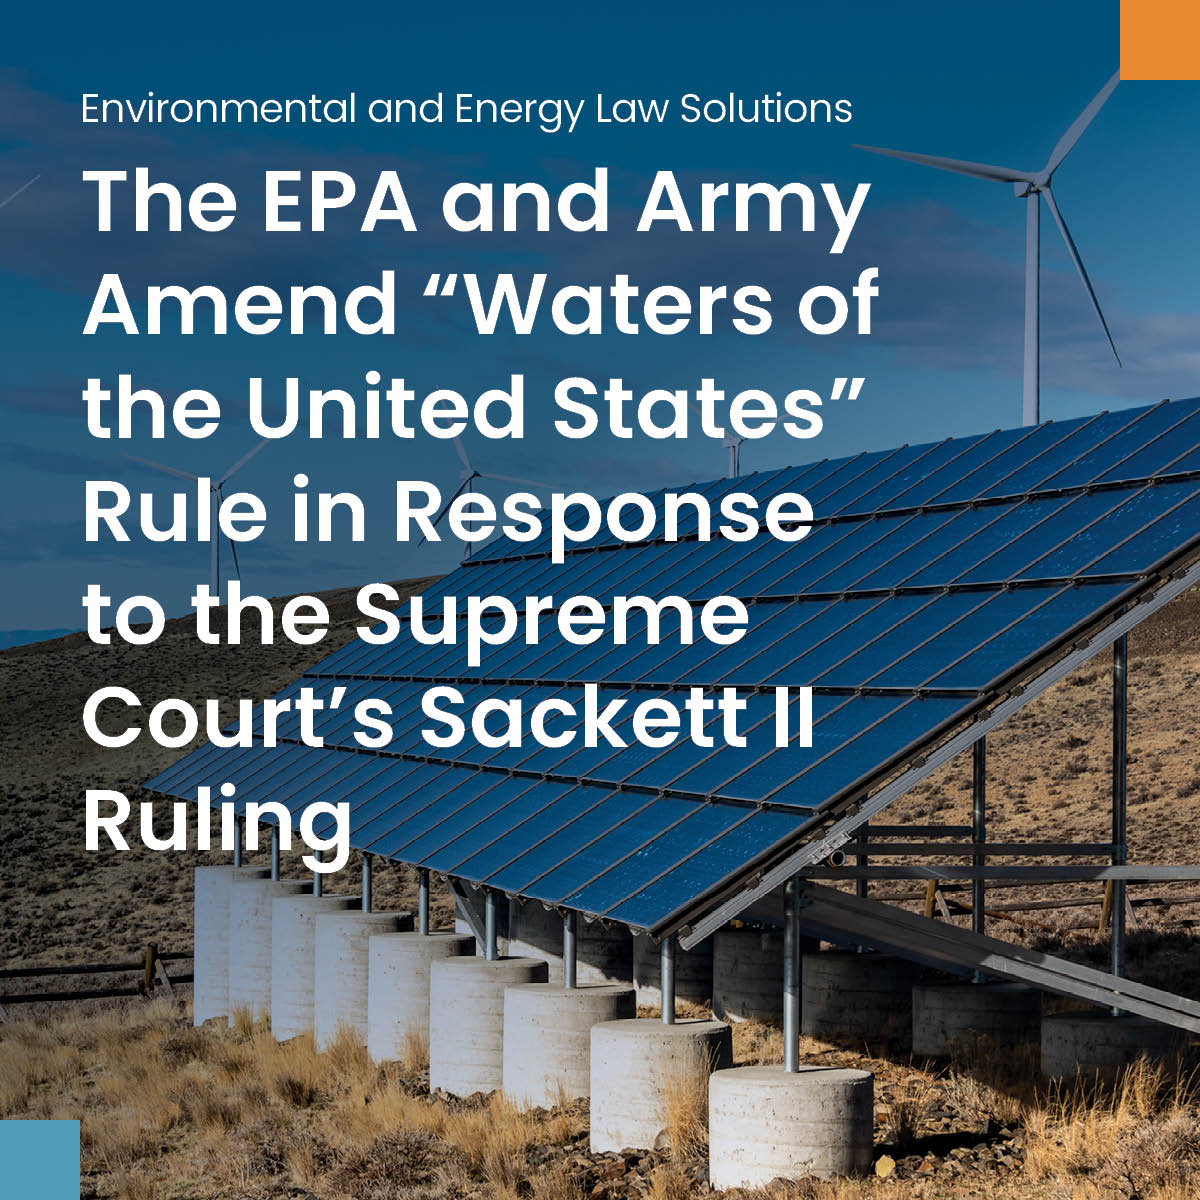 The EPA and Army Amend “Waters of the United States” Rule in Response to the Supreme Court’s Sackett II Ruling